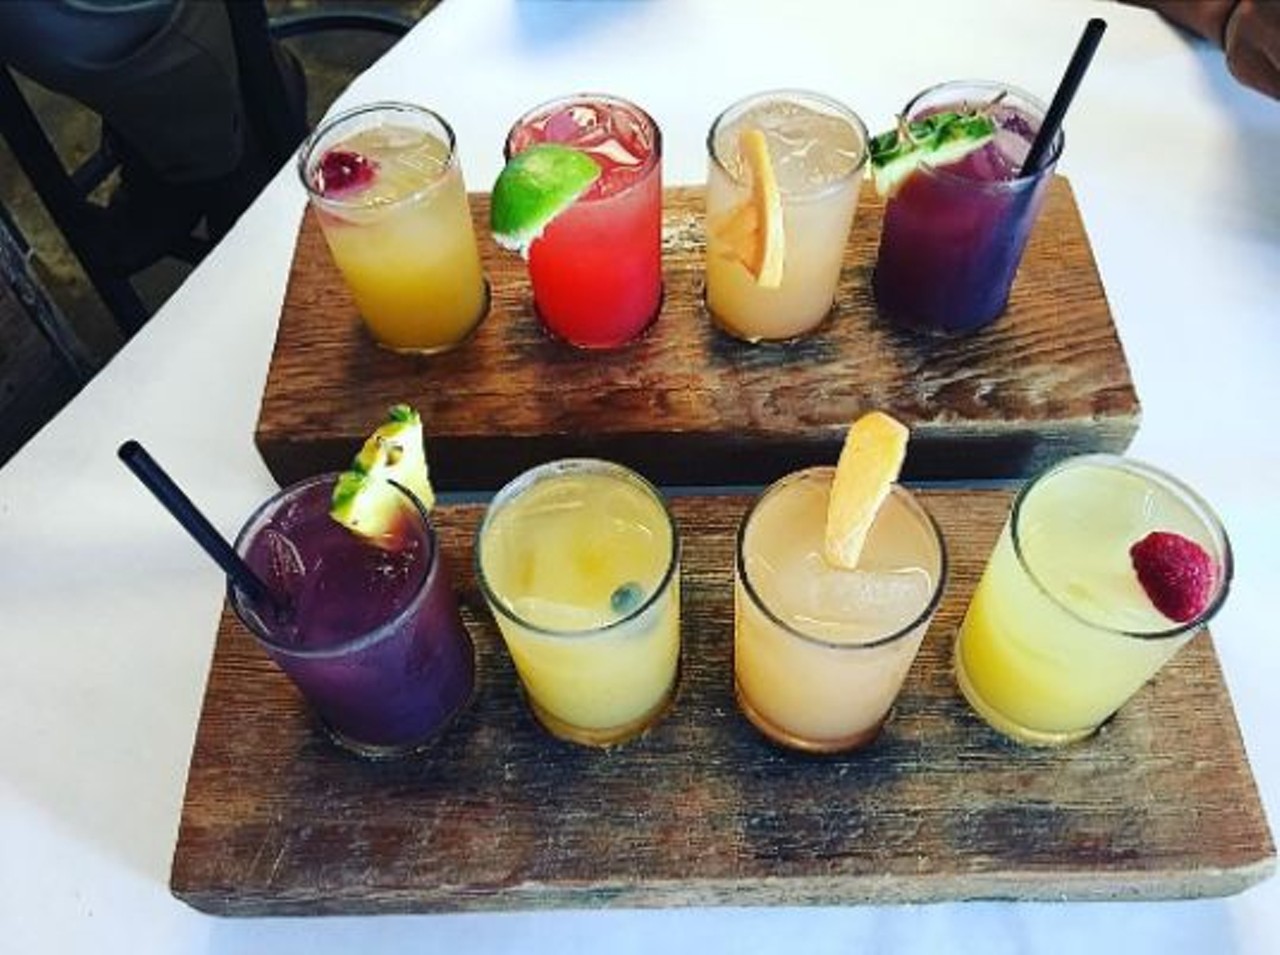 Sangria on the Burg 
5115 Fredericksburg Road, (210) 744-1448
Sangria on the Burg truly lives up to its namesake. Make sure to come thirsty so you can try all of the different boozy sangria combos.  
Photo via Instagram, cocolleen